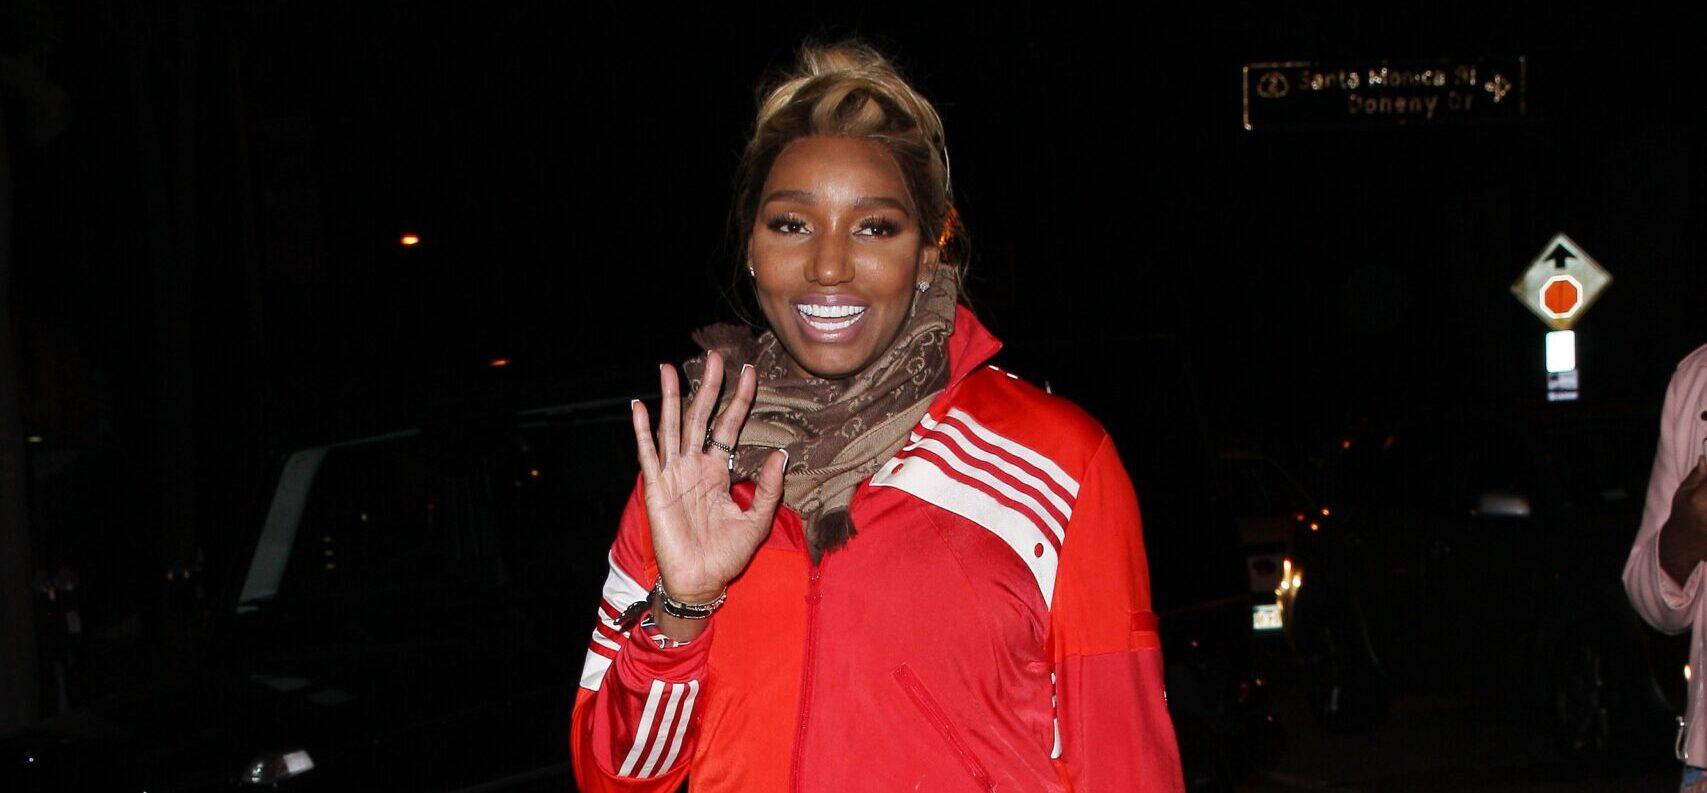 NeNe Leakes Shades Andy Cohen, Shares Her Opinion On Kim Zolciak’s Divorce